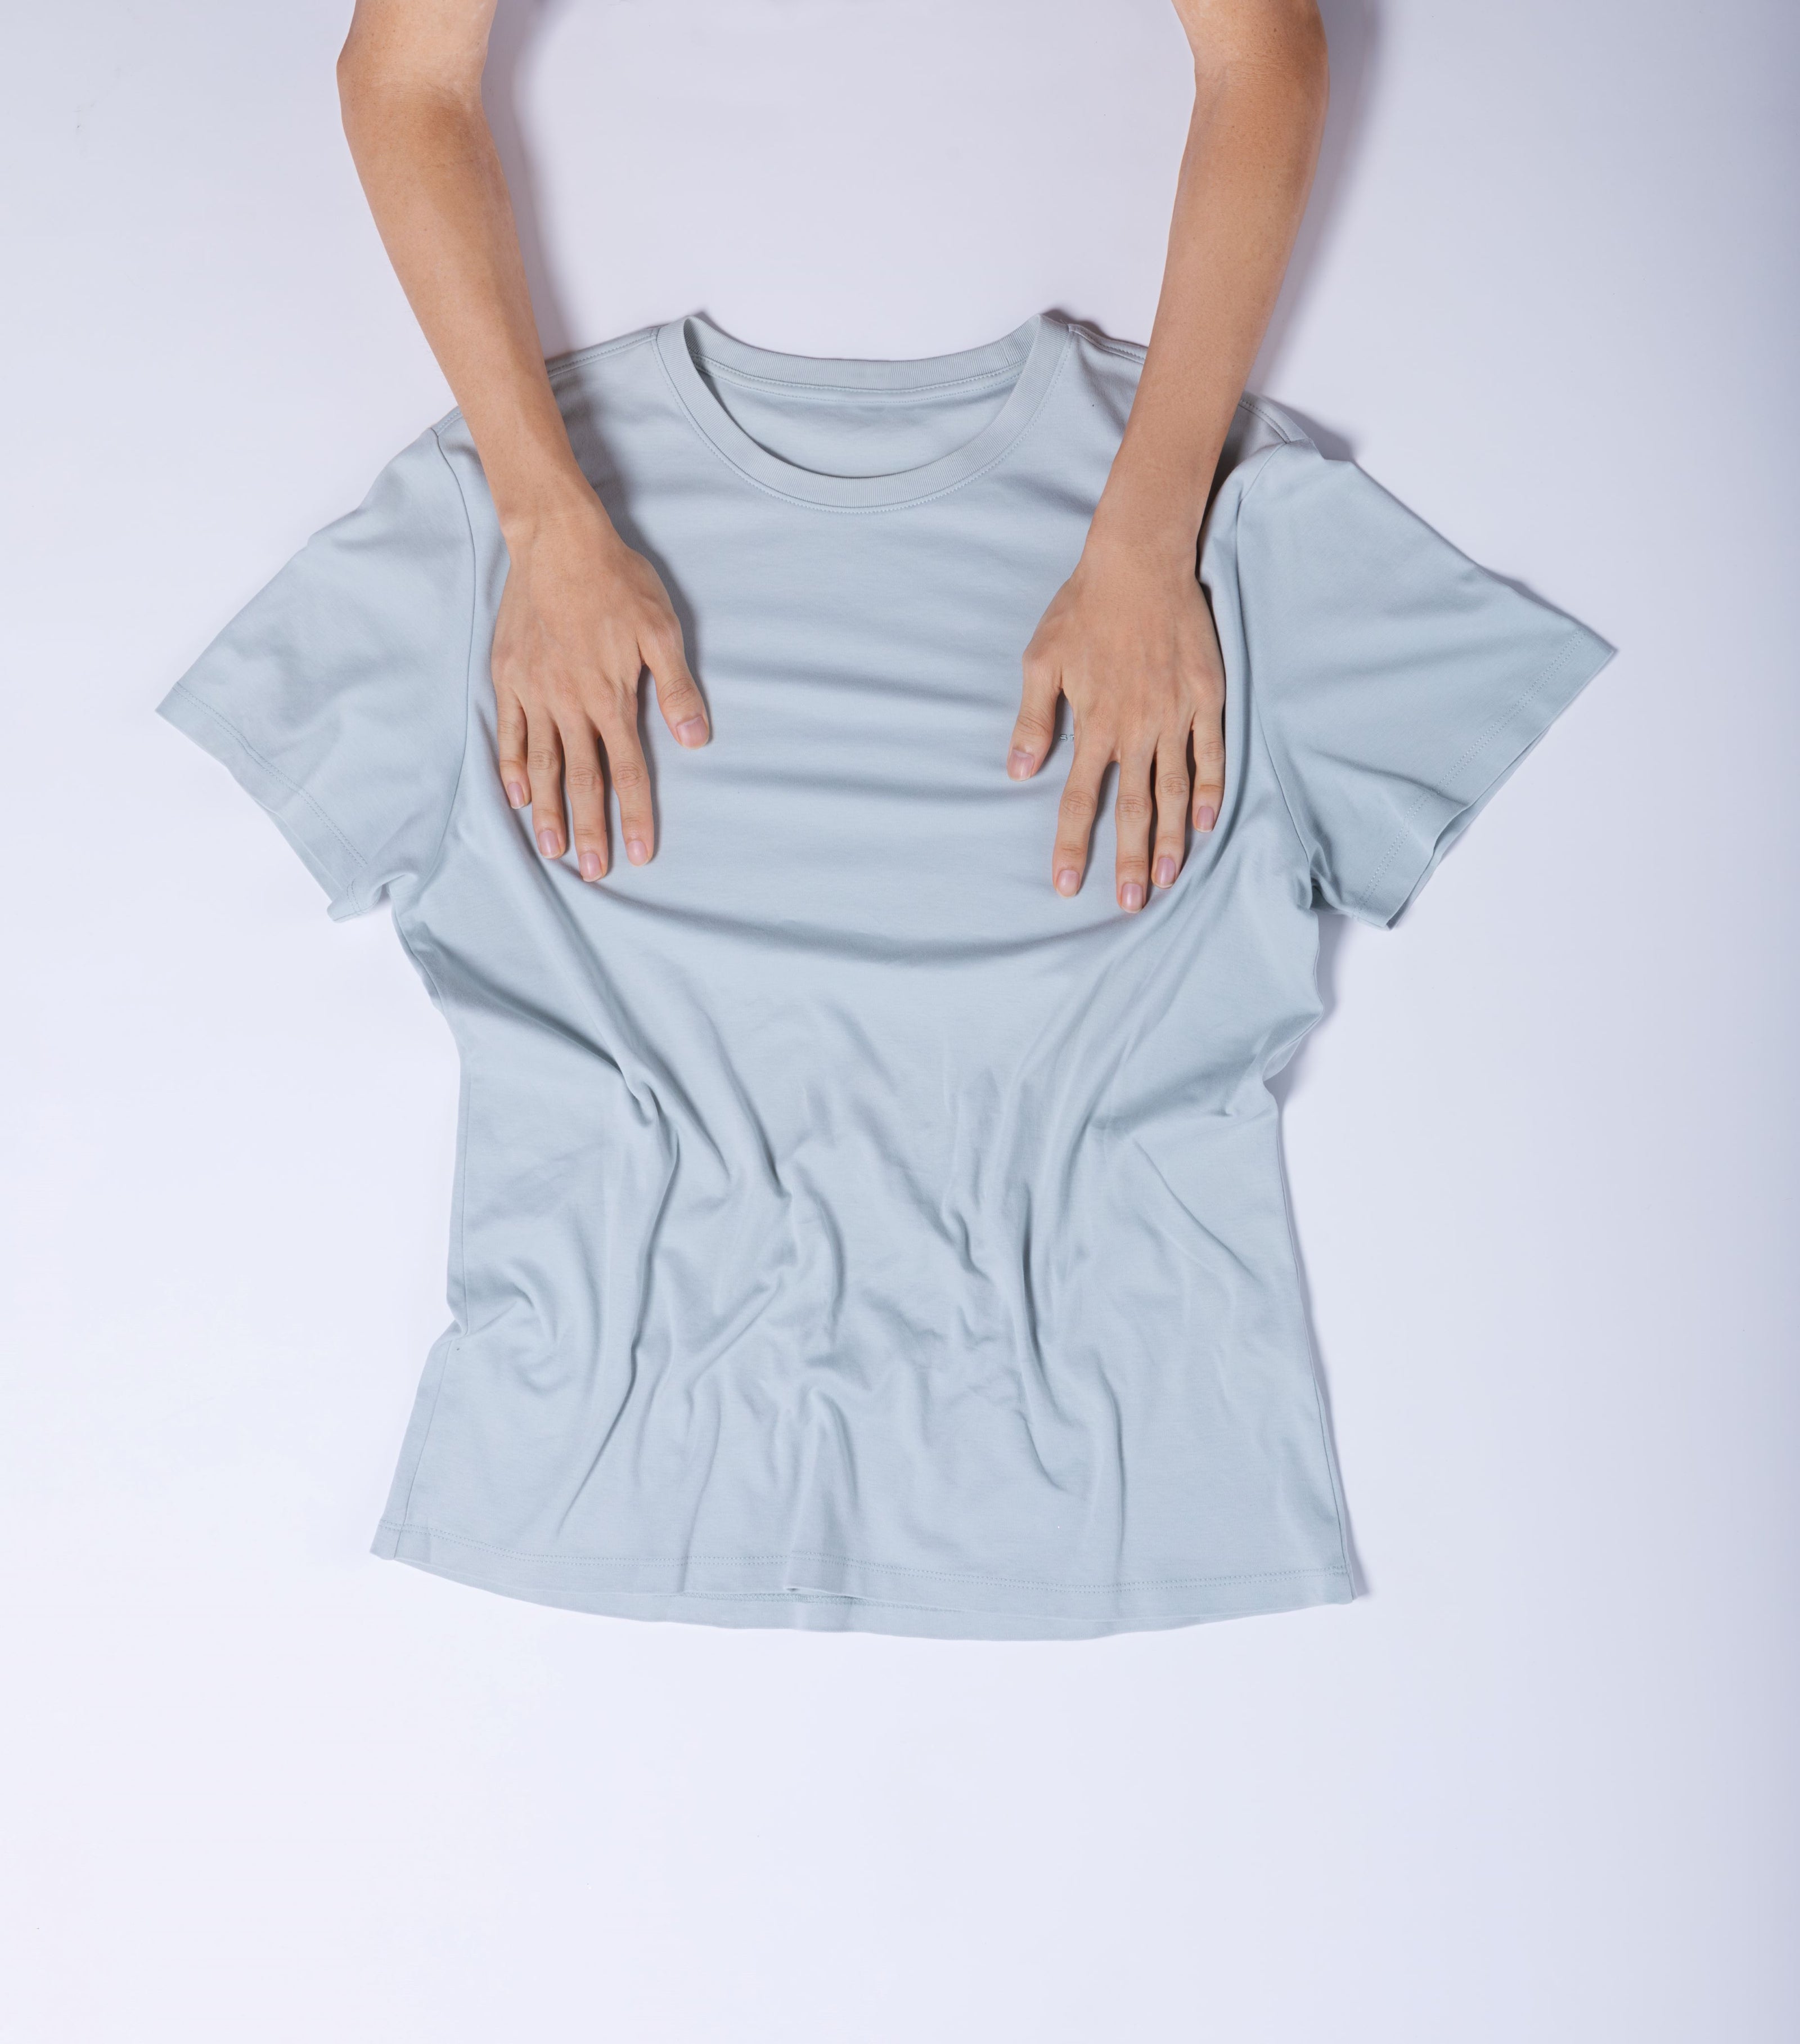 Step 2: Tug the wrinkled parts of your clothes to remove the wrinkles. Repeat the process if necessary.